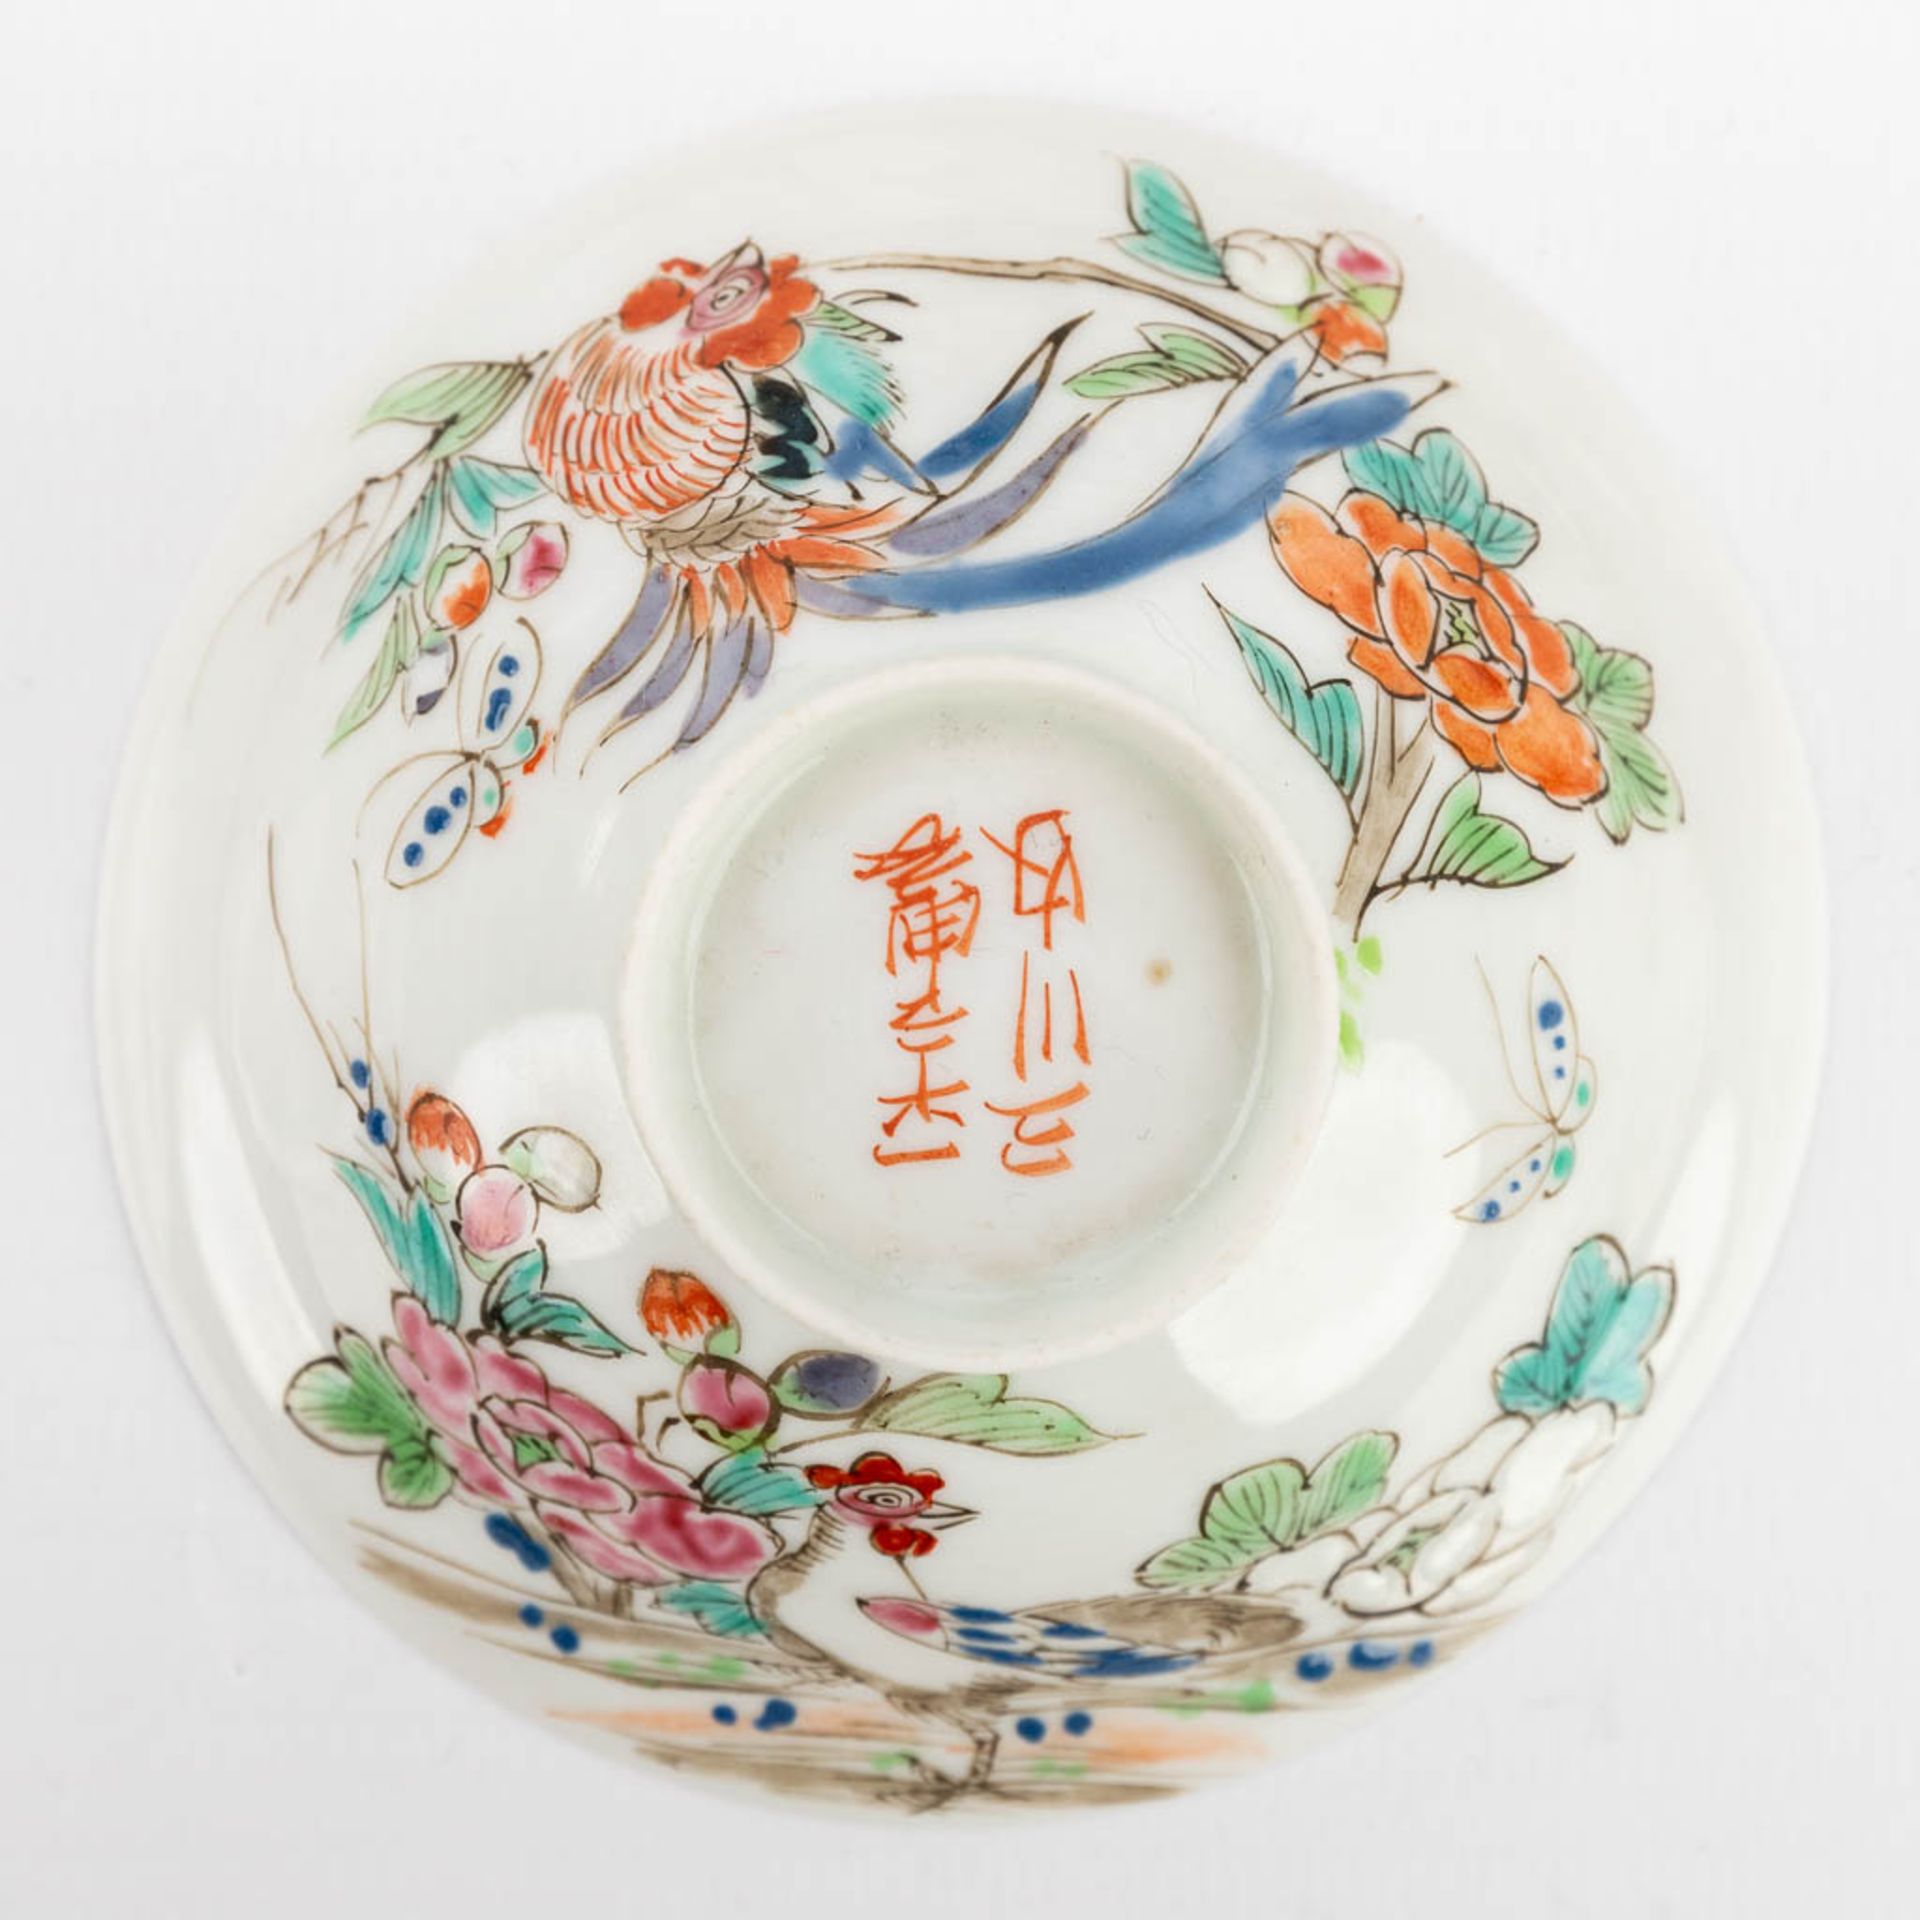 A large collection of bowls and saucers, eggshell porcelain, Japan, 20th C. (H:9 x D:9 cm) - Image 4 of 24